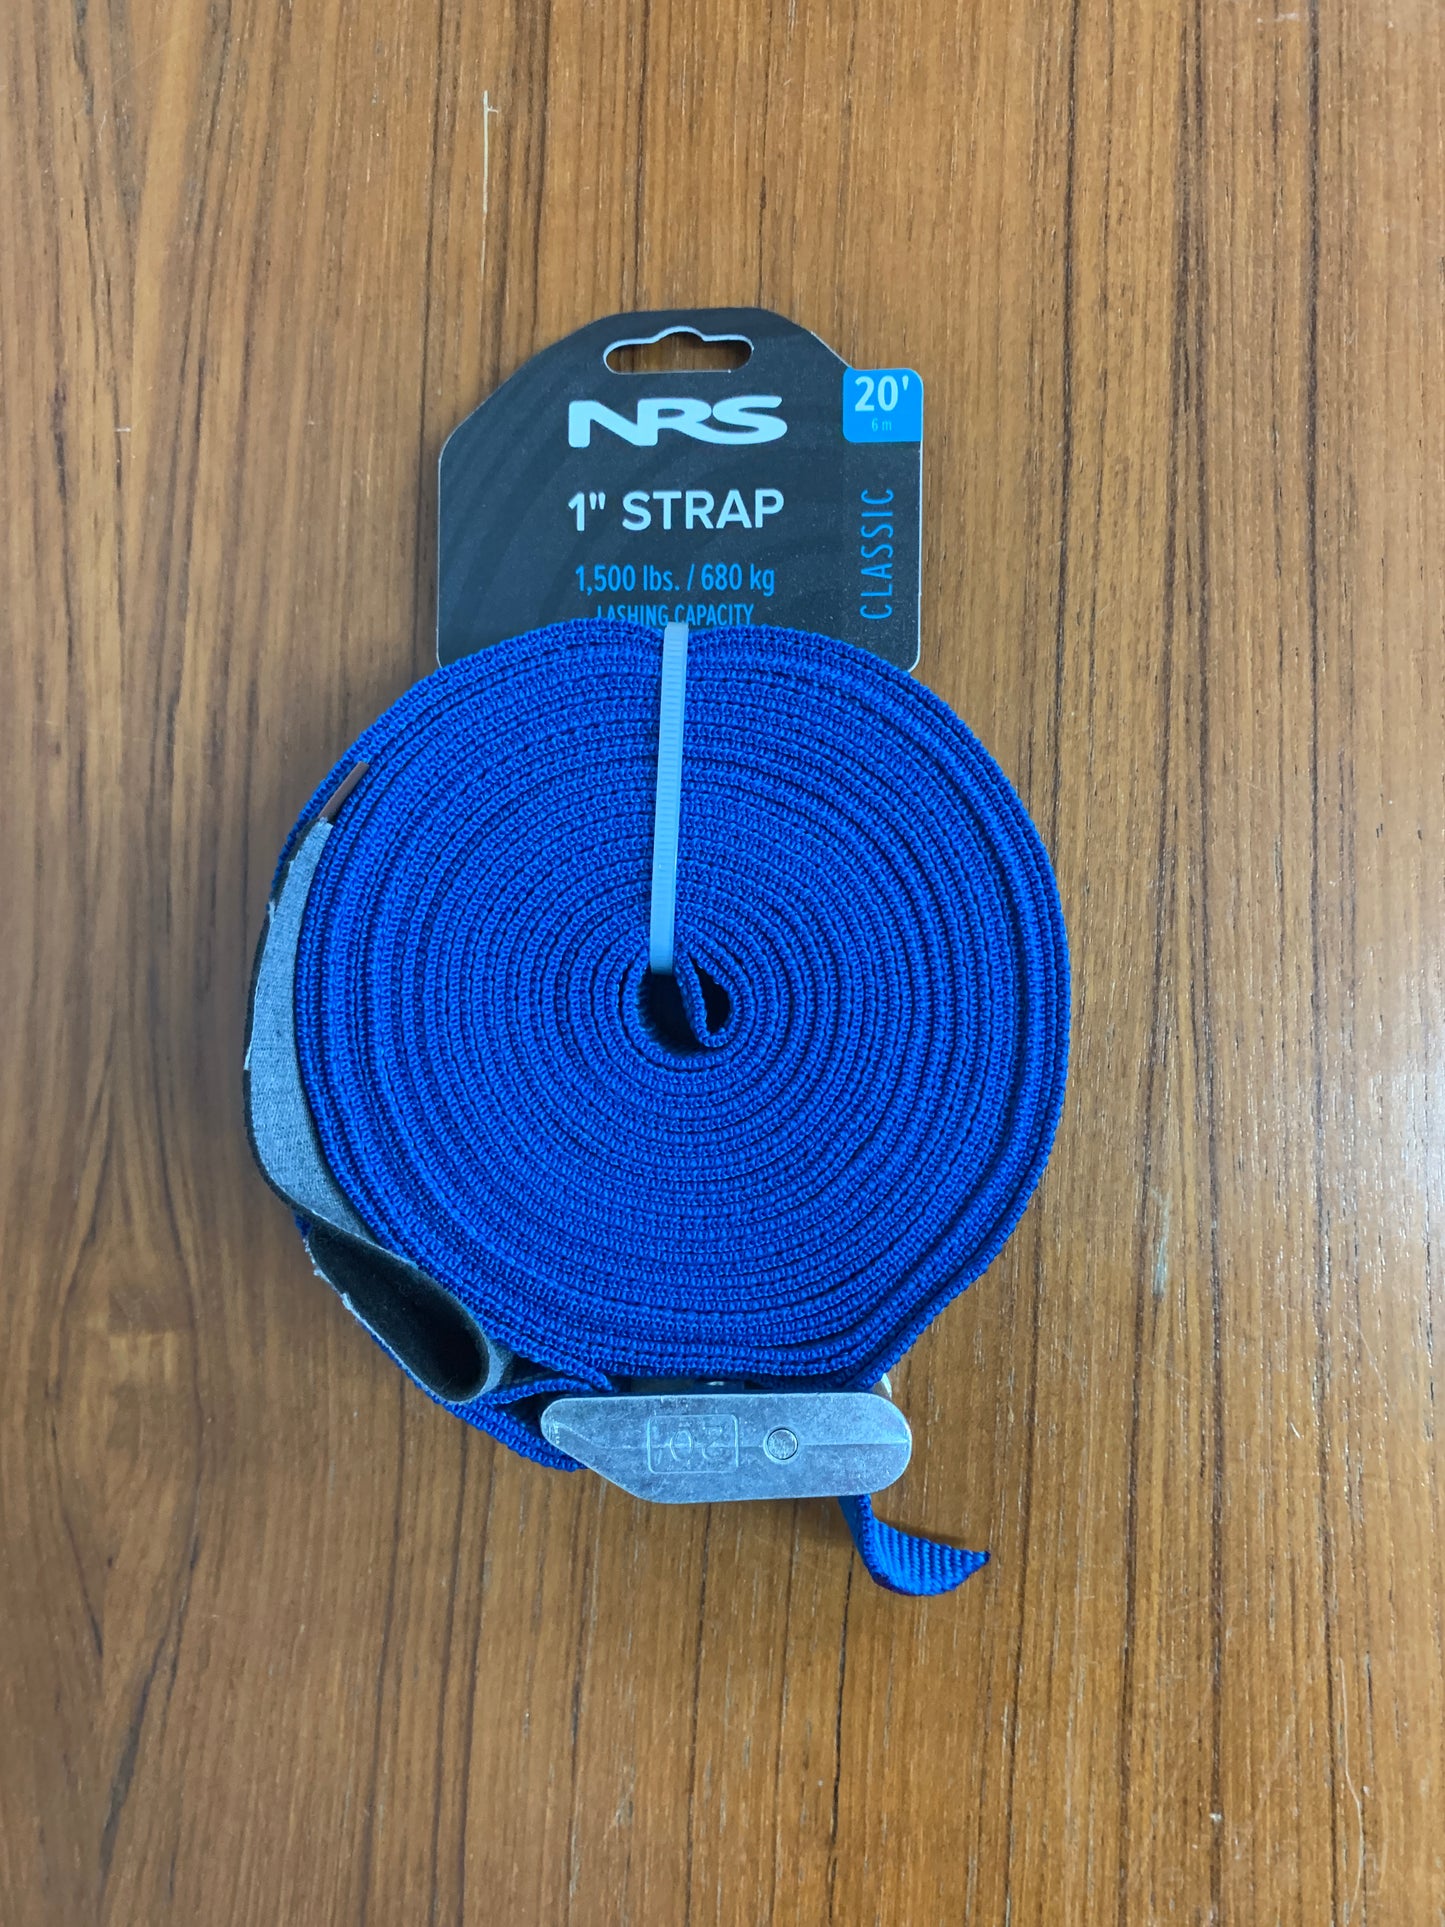 NRS + Outdoors Inc Logo 1" Tie-Down Strap